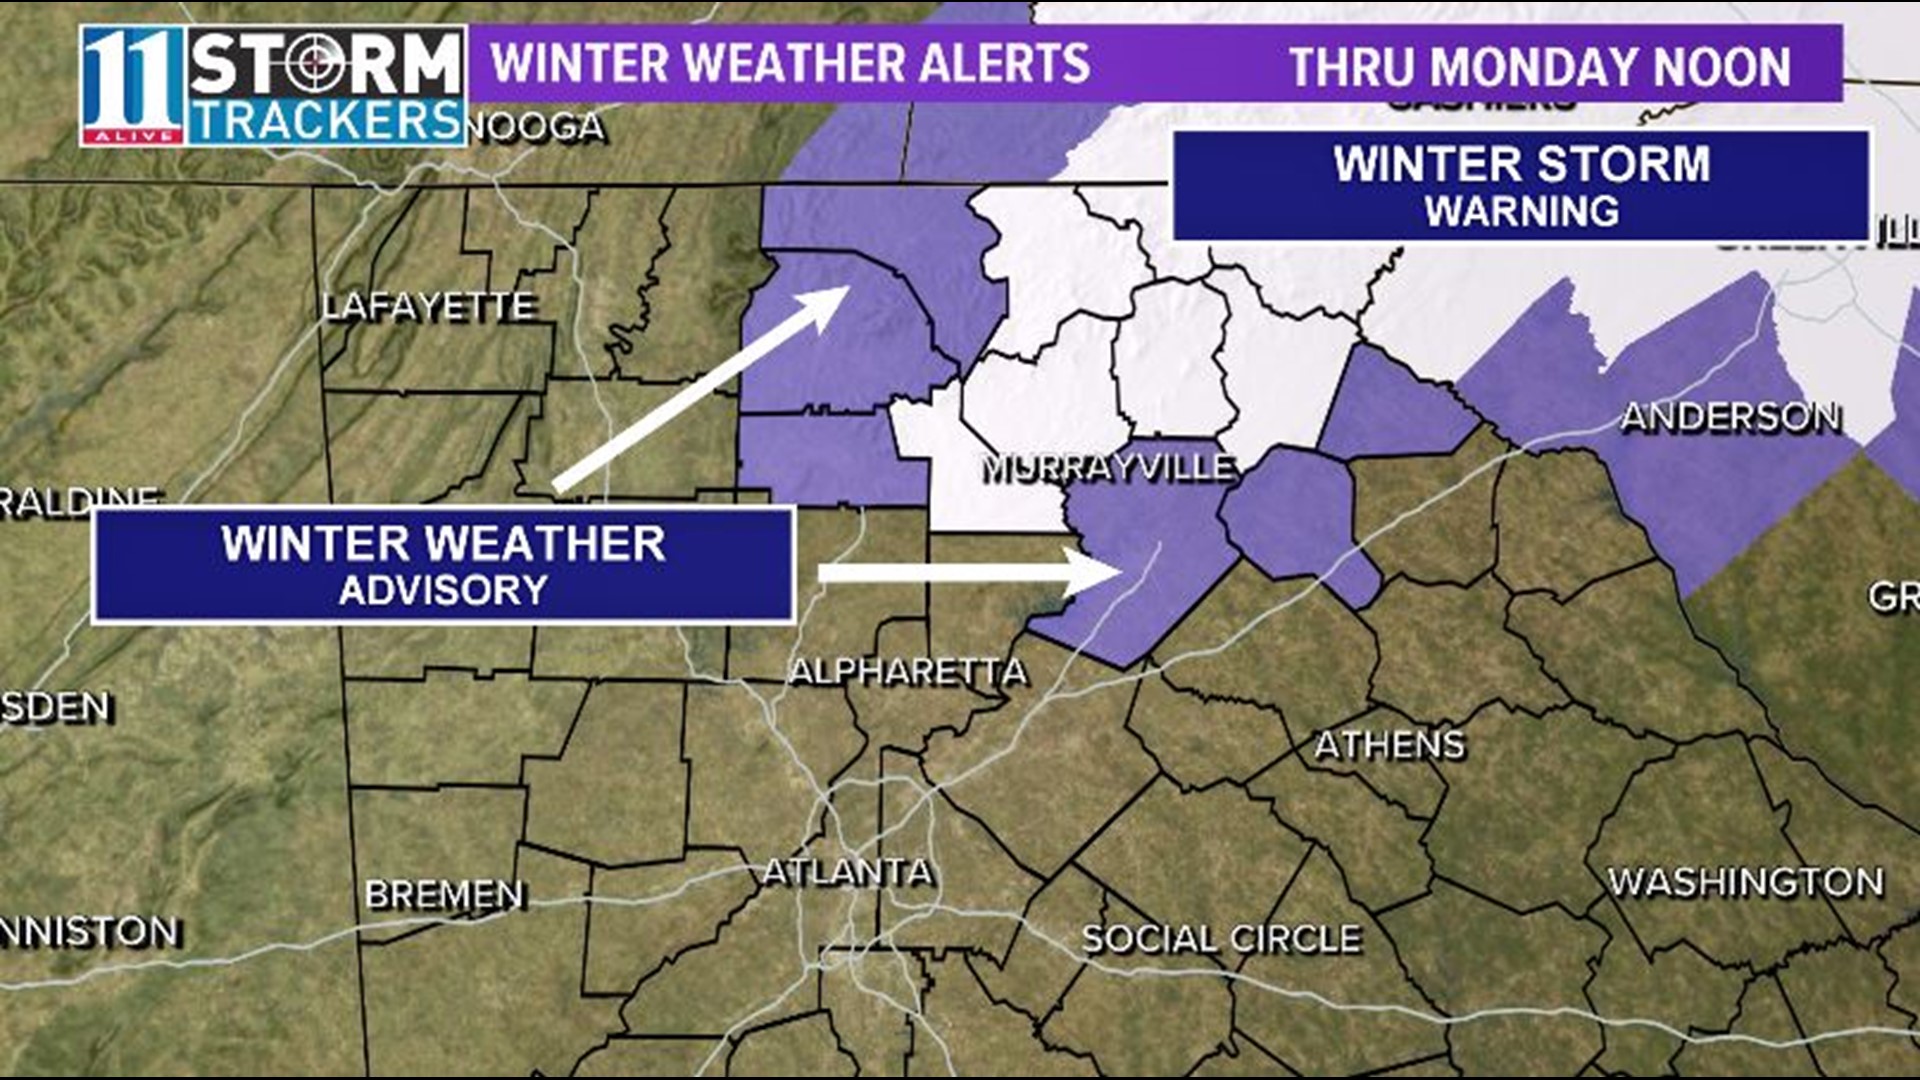 Winter weather alerts extended for some counties